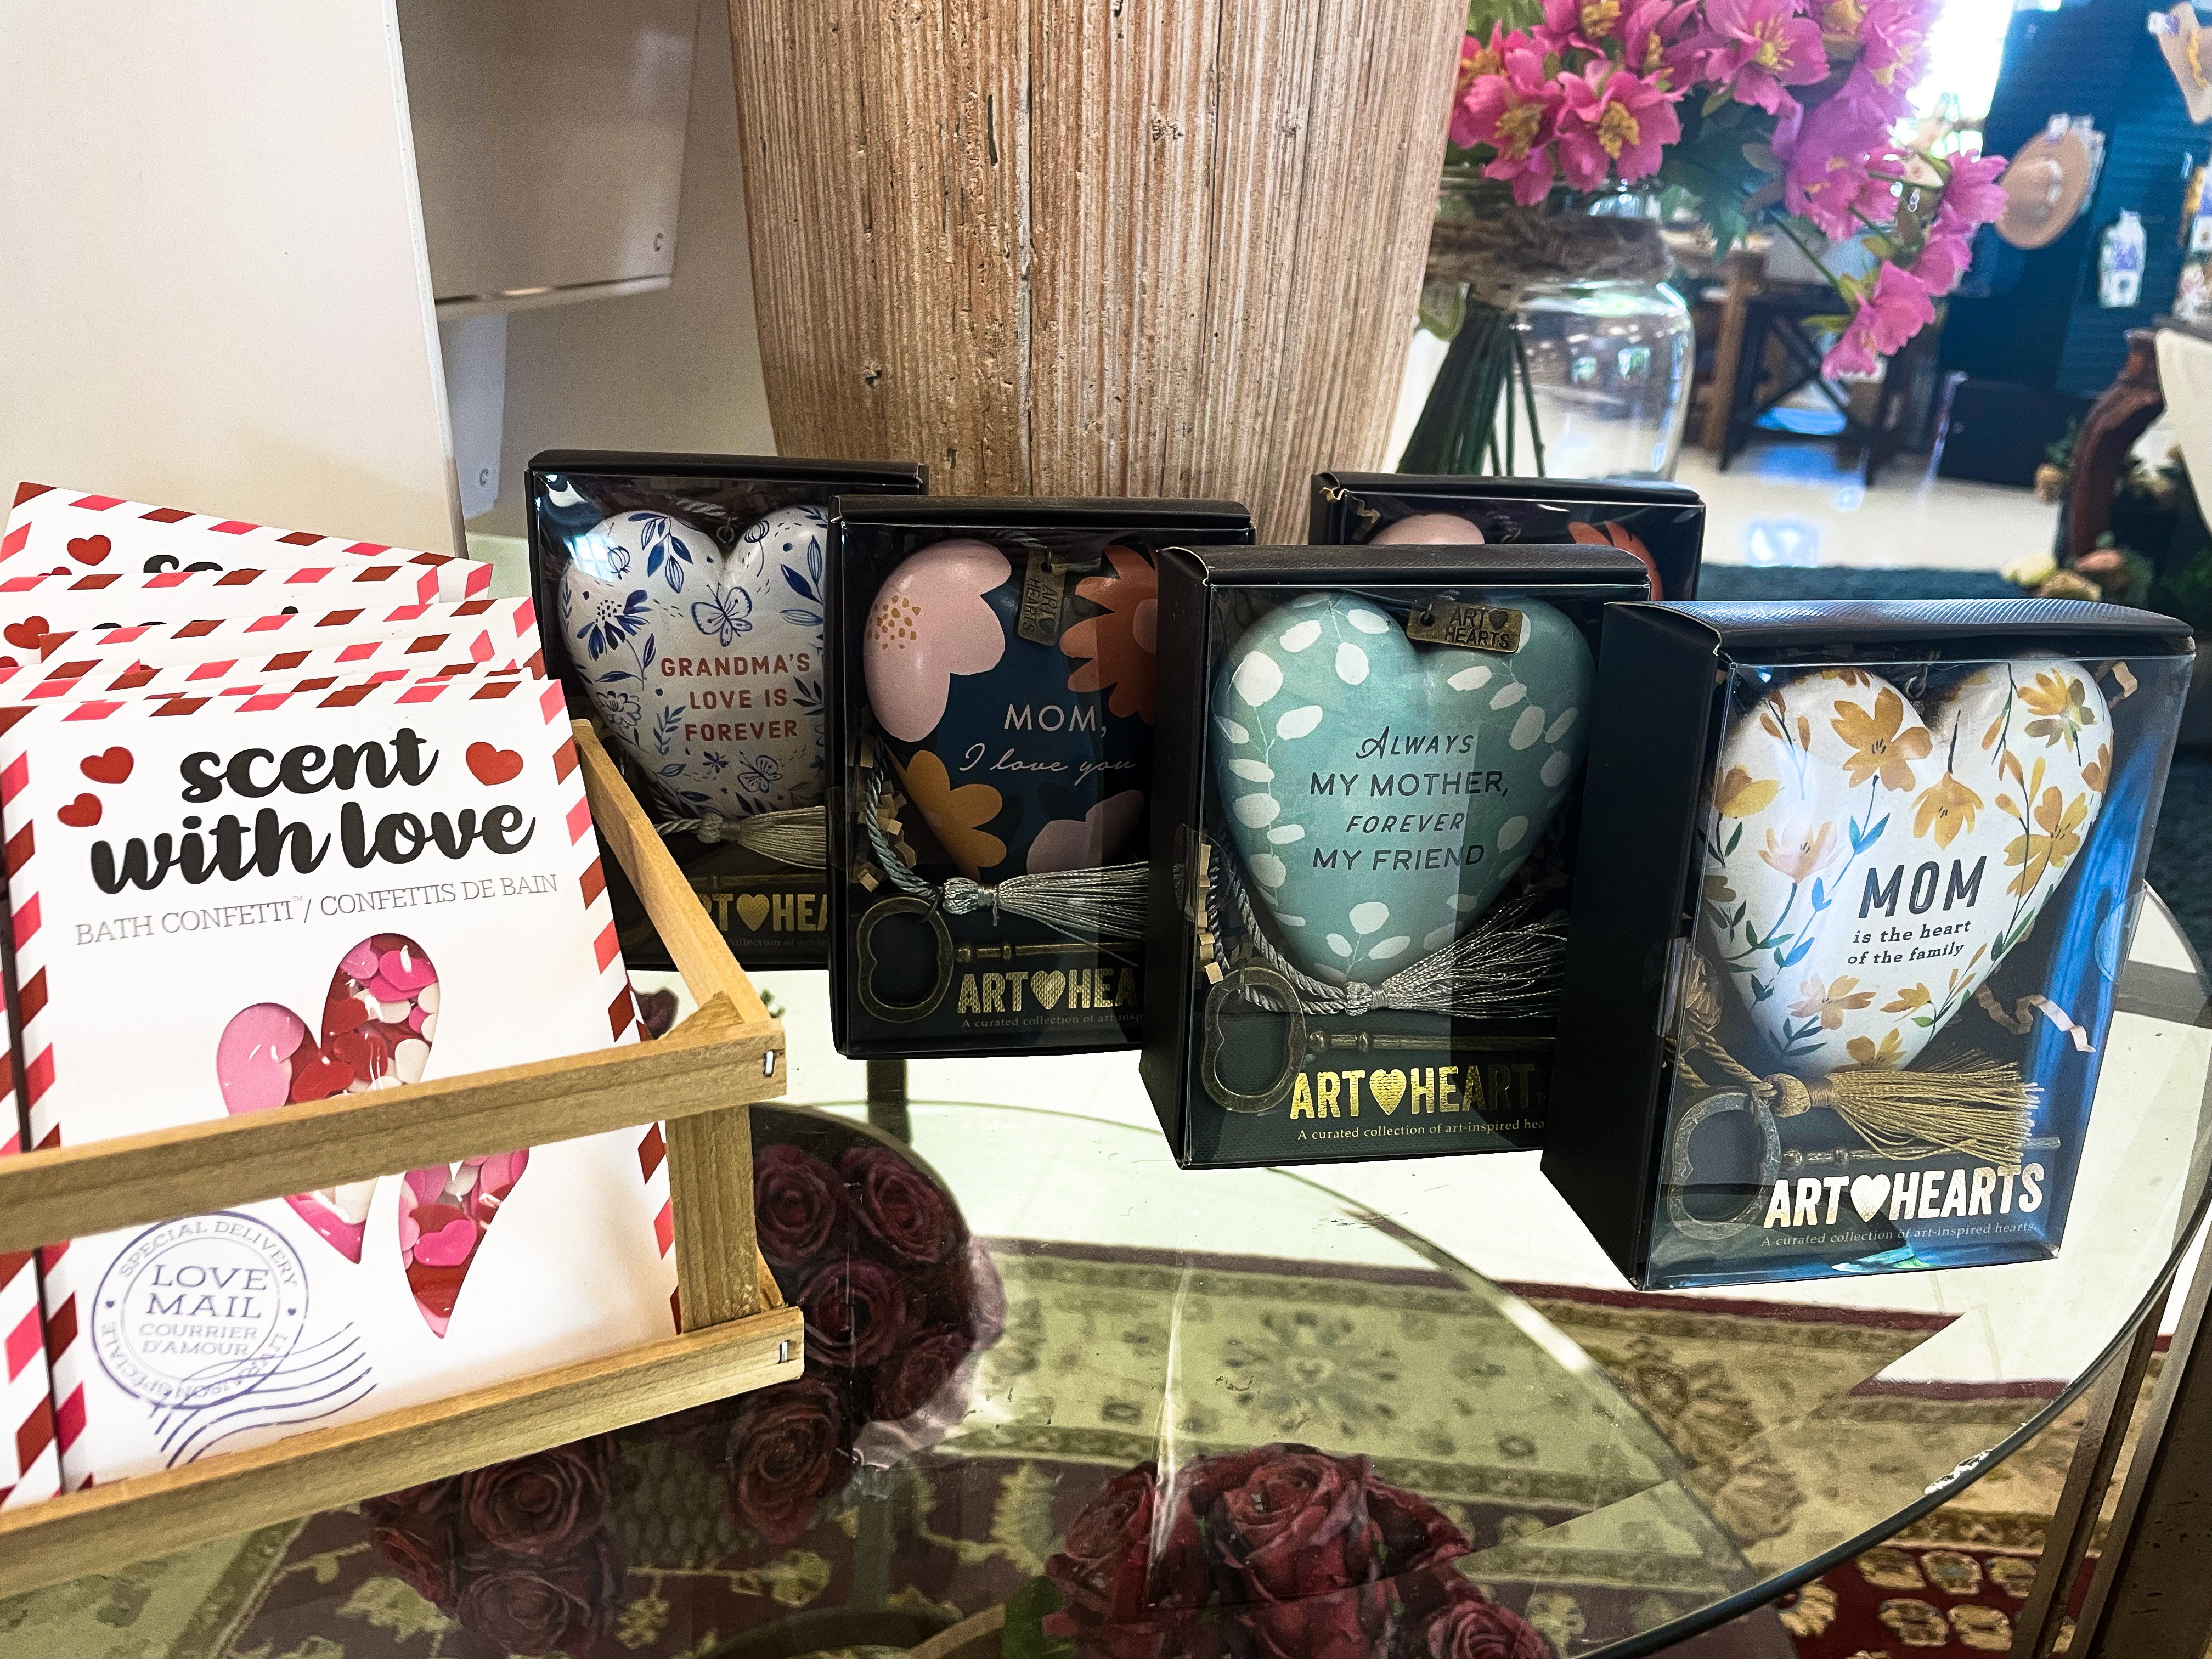 Some "special surprises" we've got in stock right now. Left to right: "Scent with Love" bath confetti, Grandmother and Mother Art Heart decor.